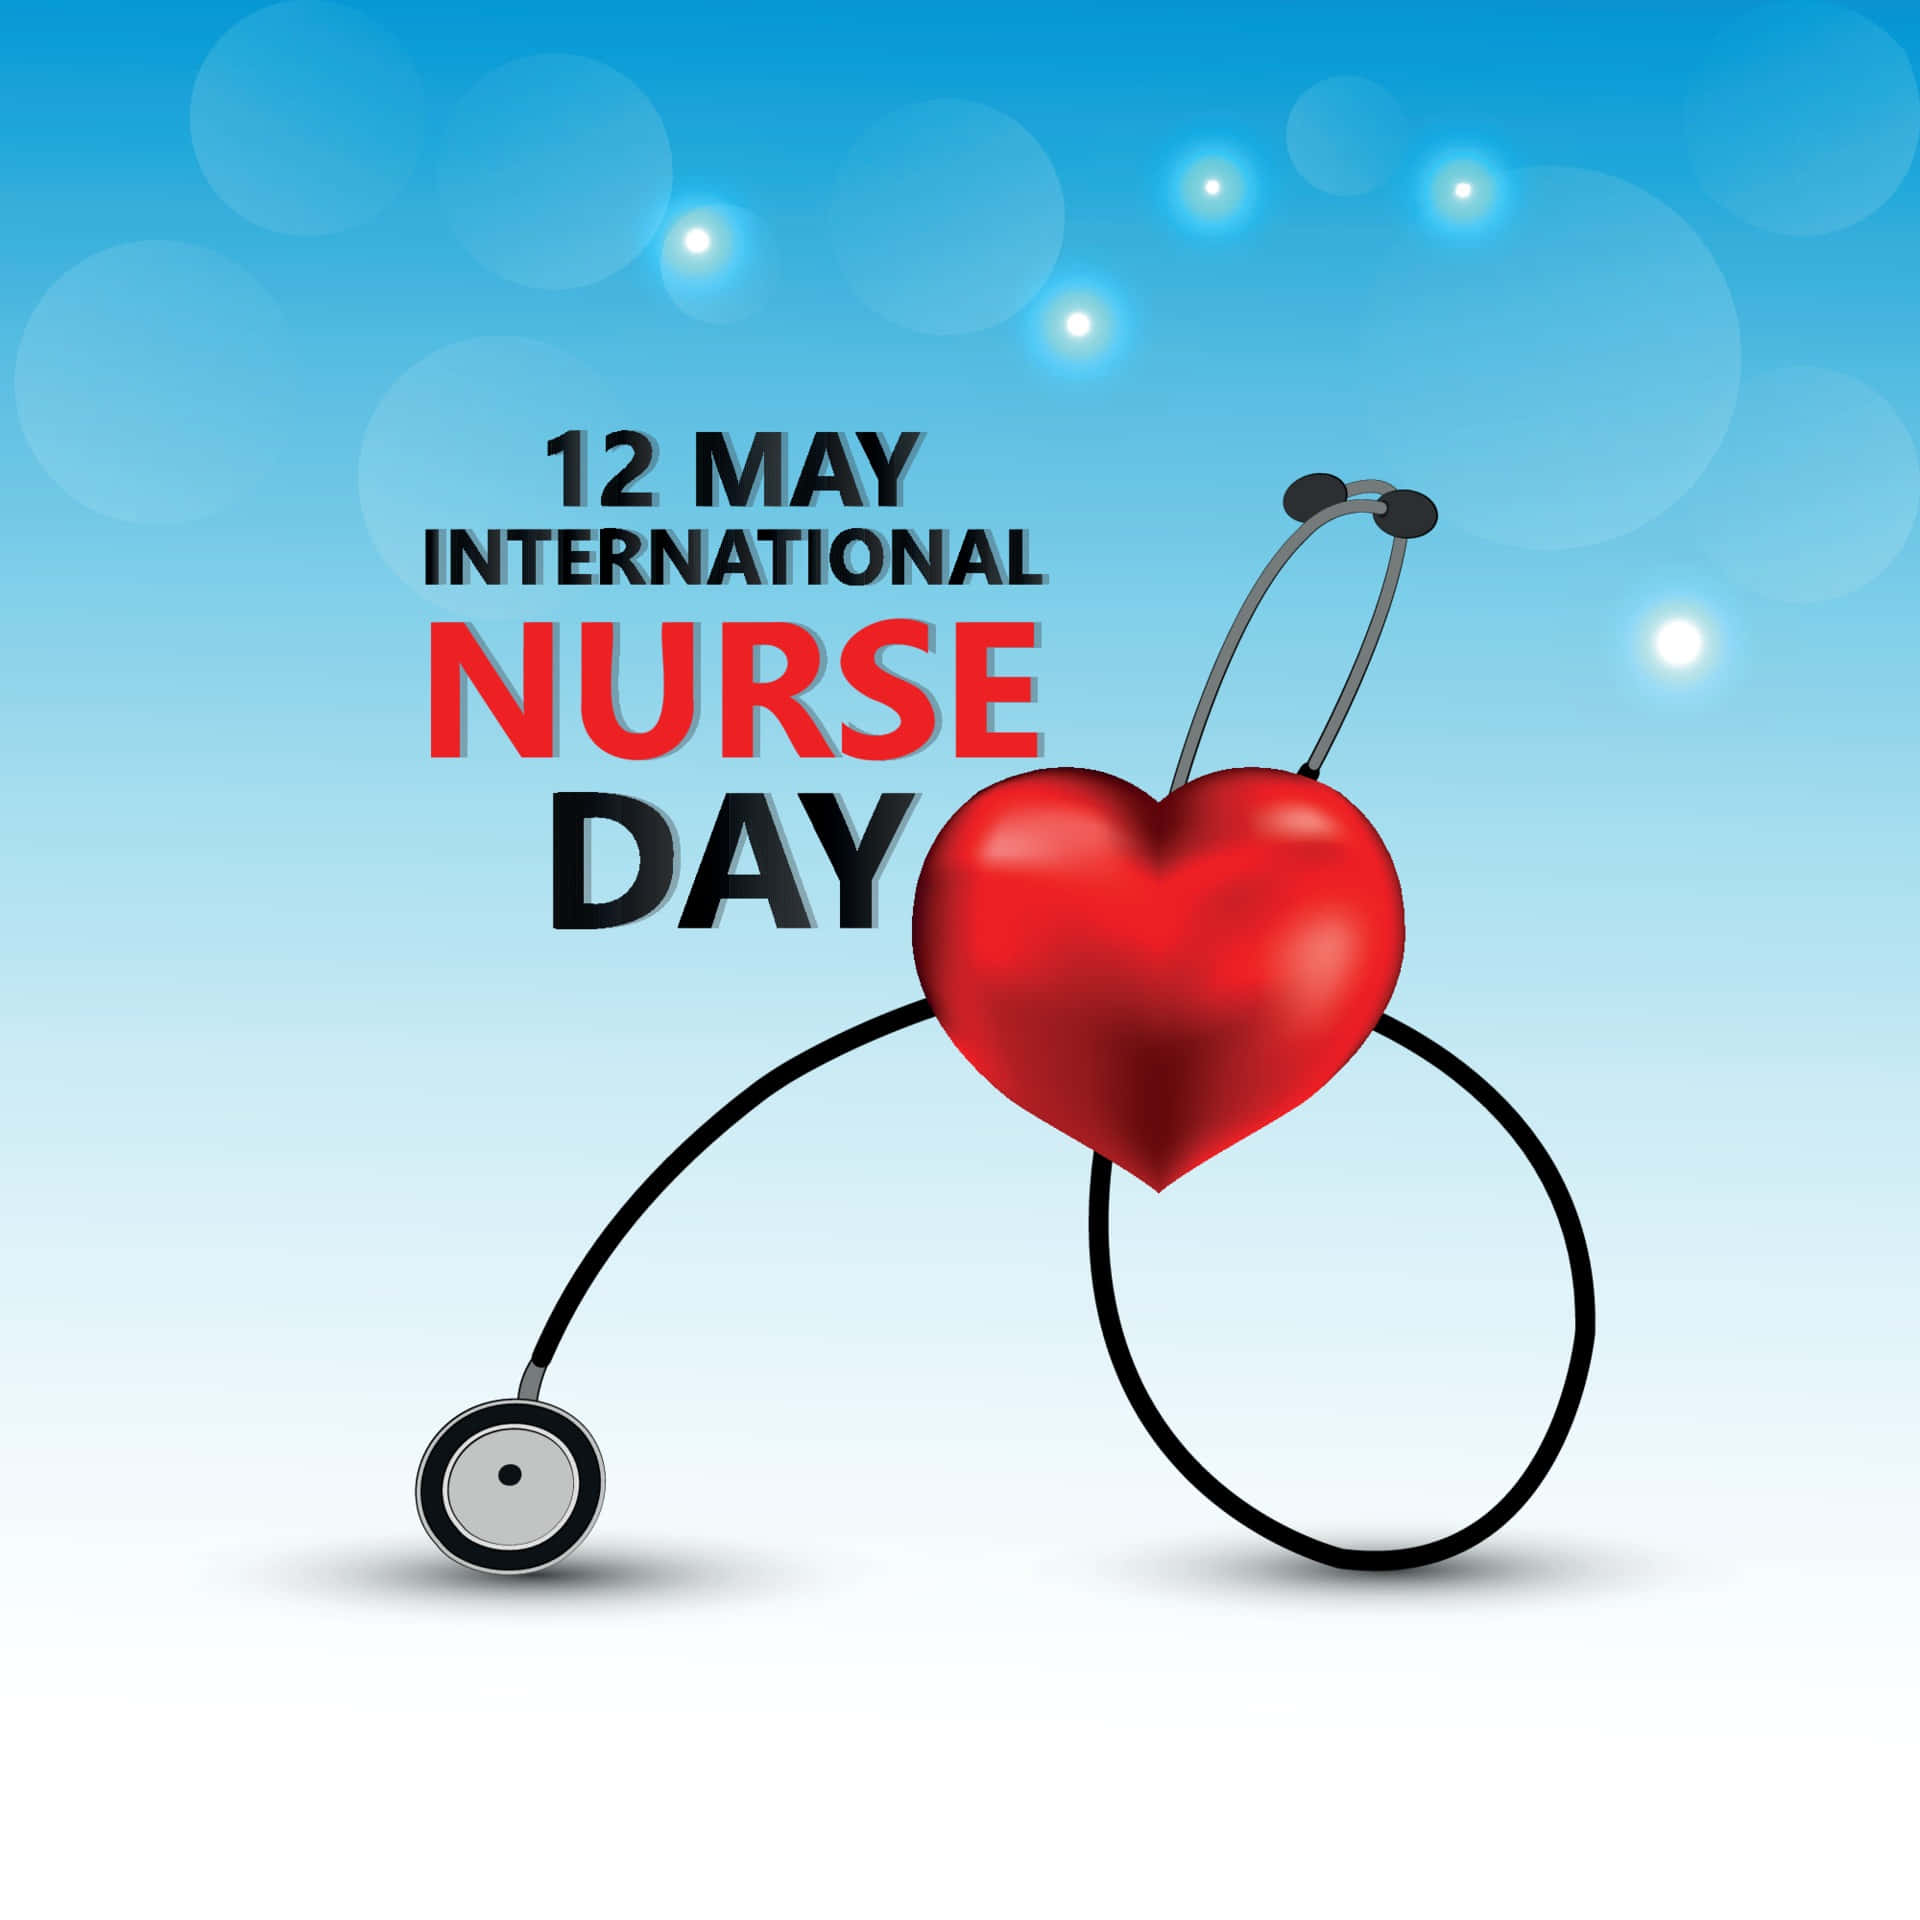 International Nurse Day With A Heart And Stethoscope